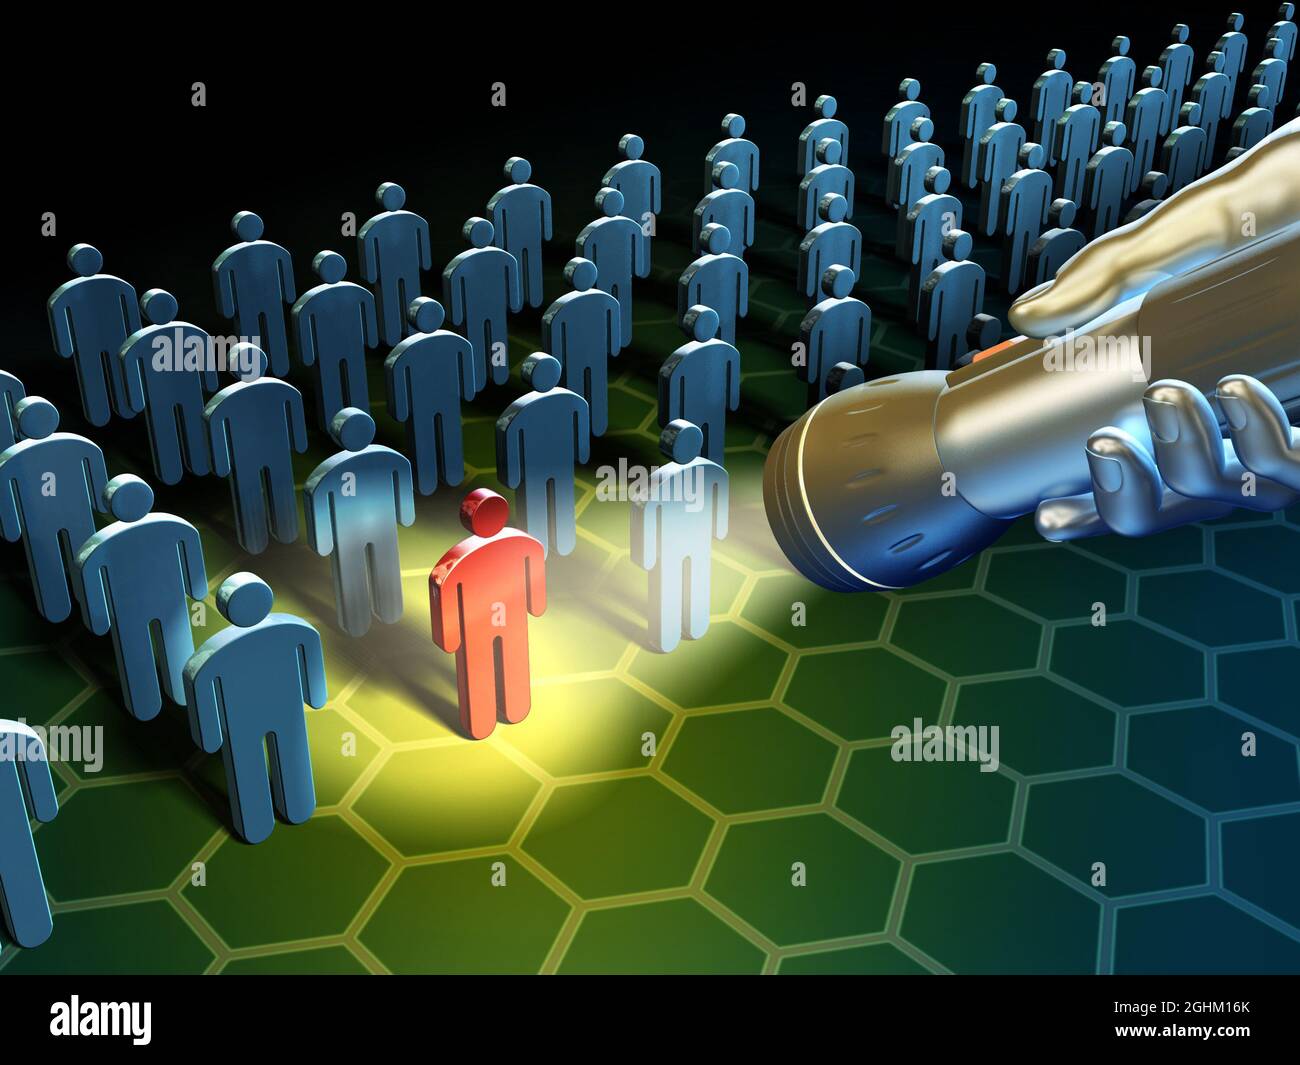 Using a flashlight to search in a large group of people icons. Digital illustration. Stock Photo